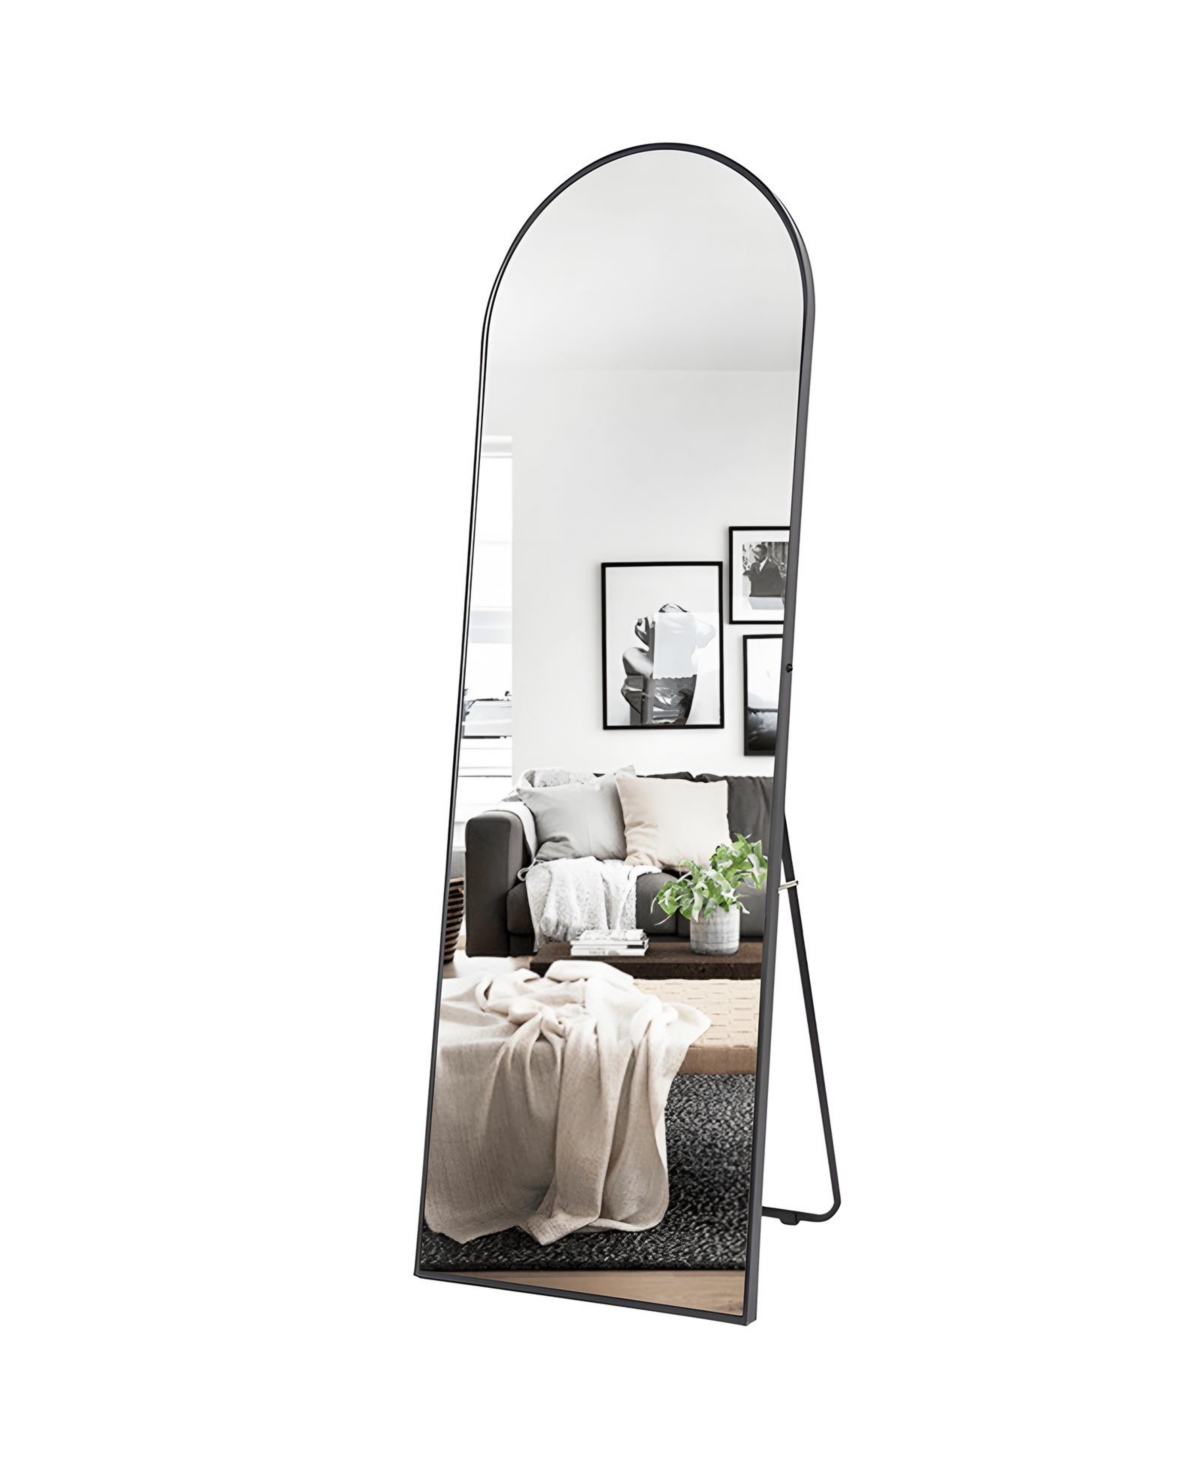 65 x22 inch Arched Full Length Mirror - Black